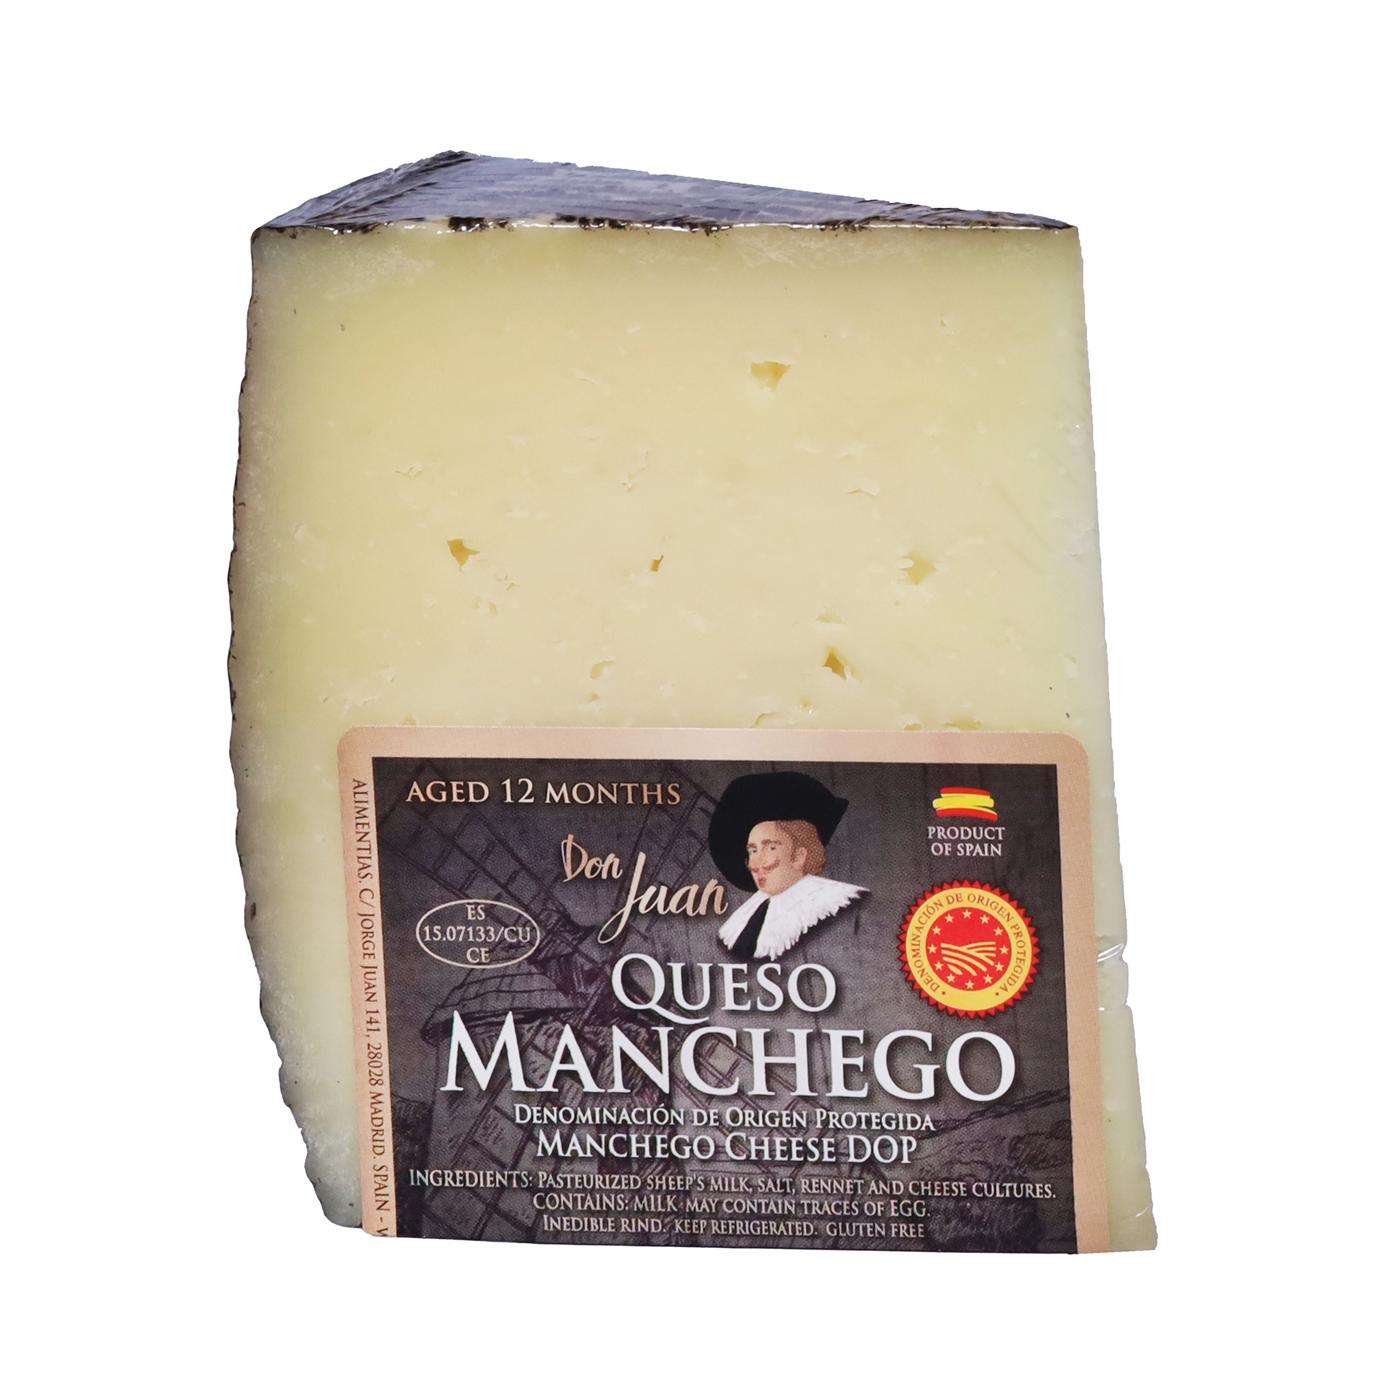 Don Juan Queso Manchego Cheese; image 3 of 3